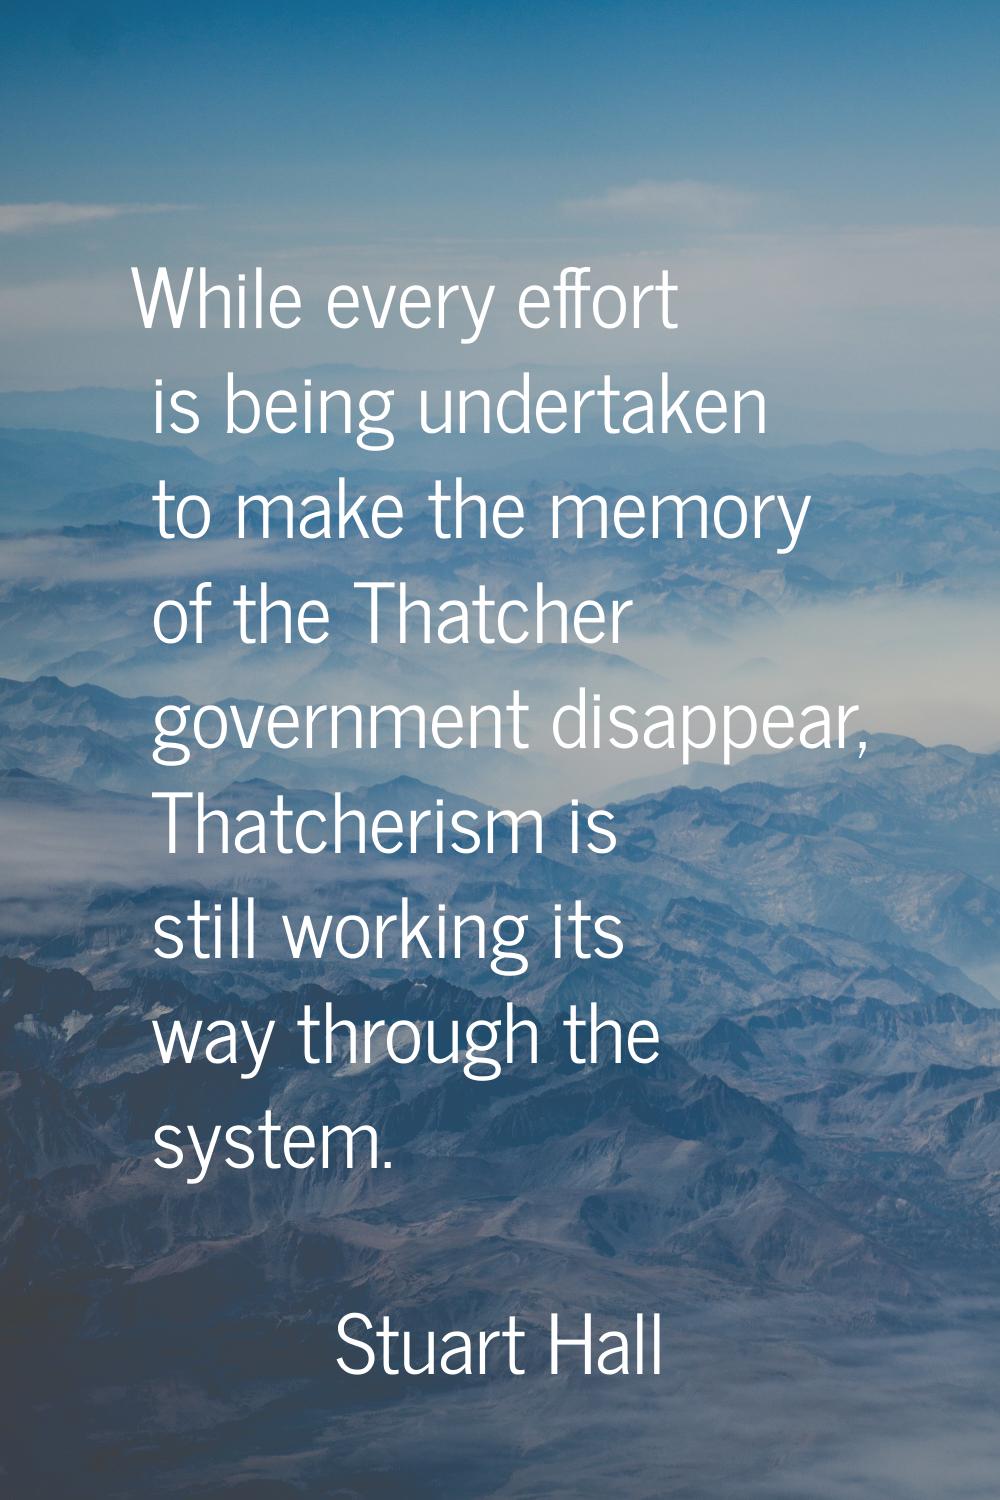 While every effort is being undertaken to make the memory of the Thatcher government disappear, Tha